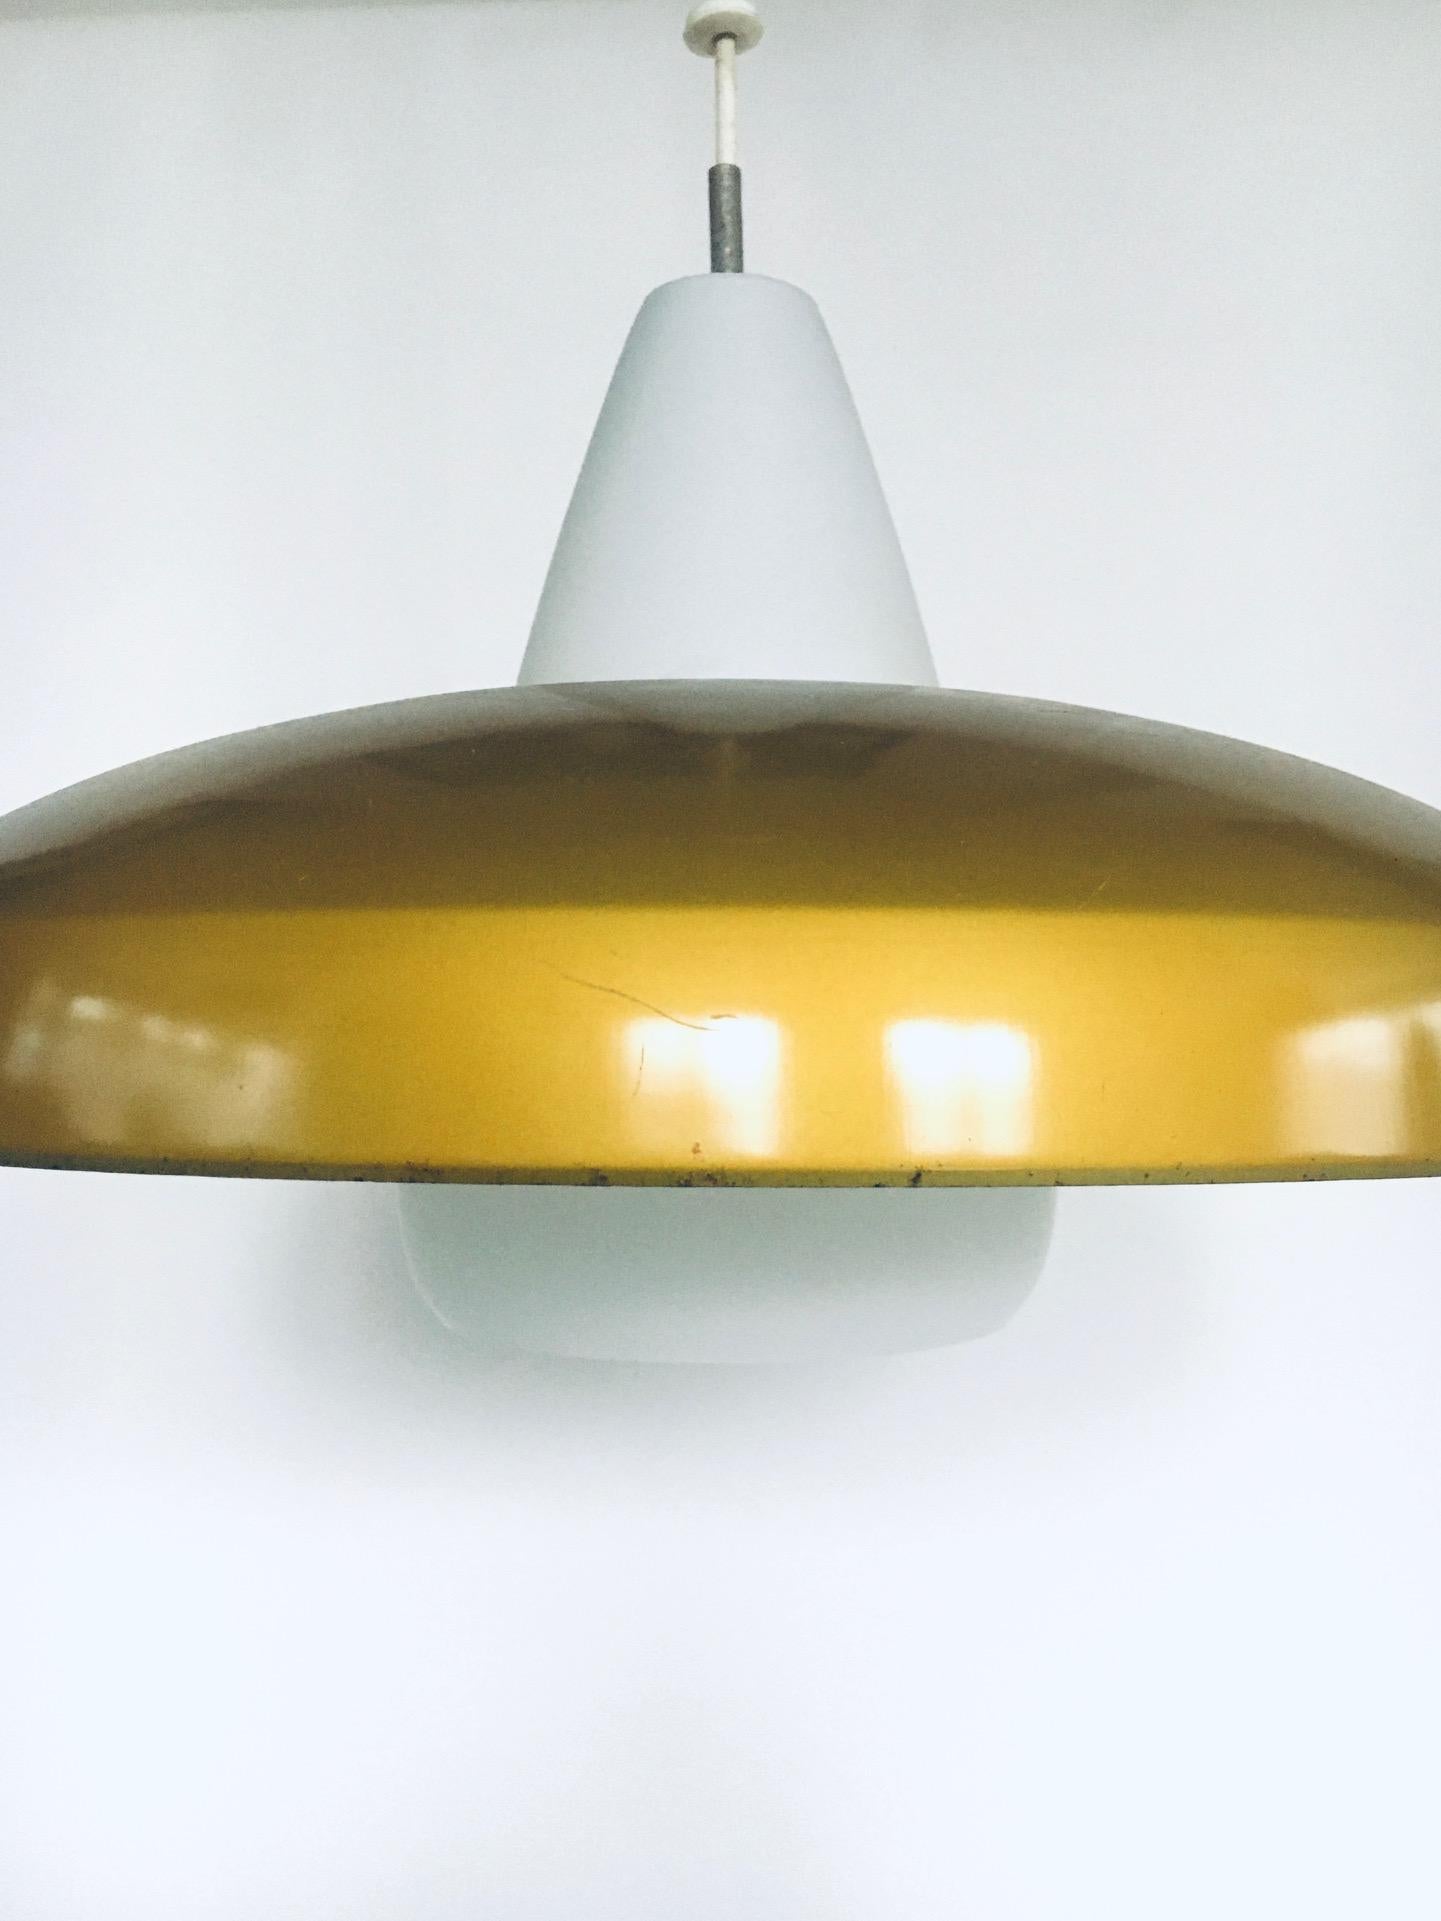 Mid-Century Modern Dutch Design Pendant Lamp by Philips, 1950s For Sale 2